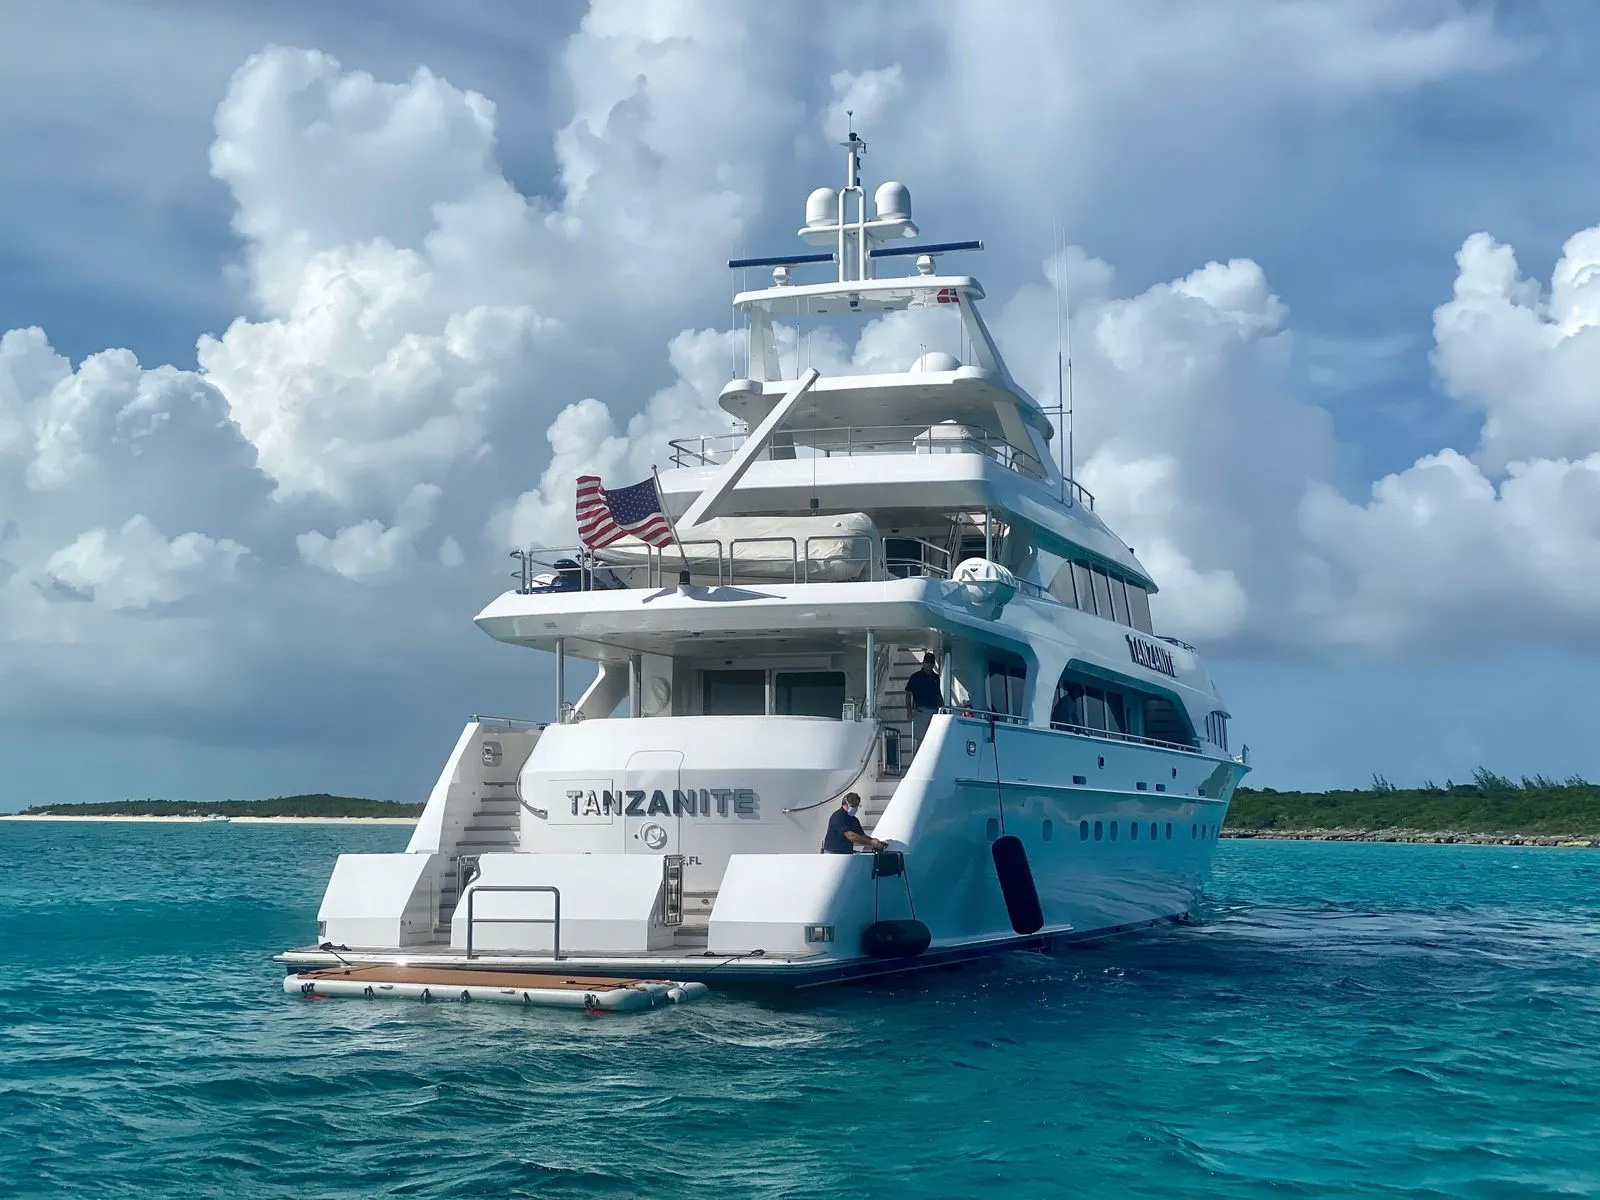 TANZANITE: A 145-Foot Jewel of the Sea - Now Available